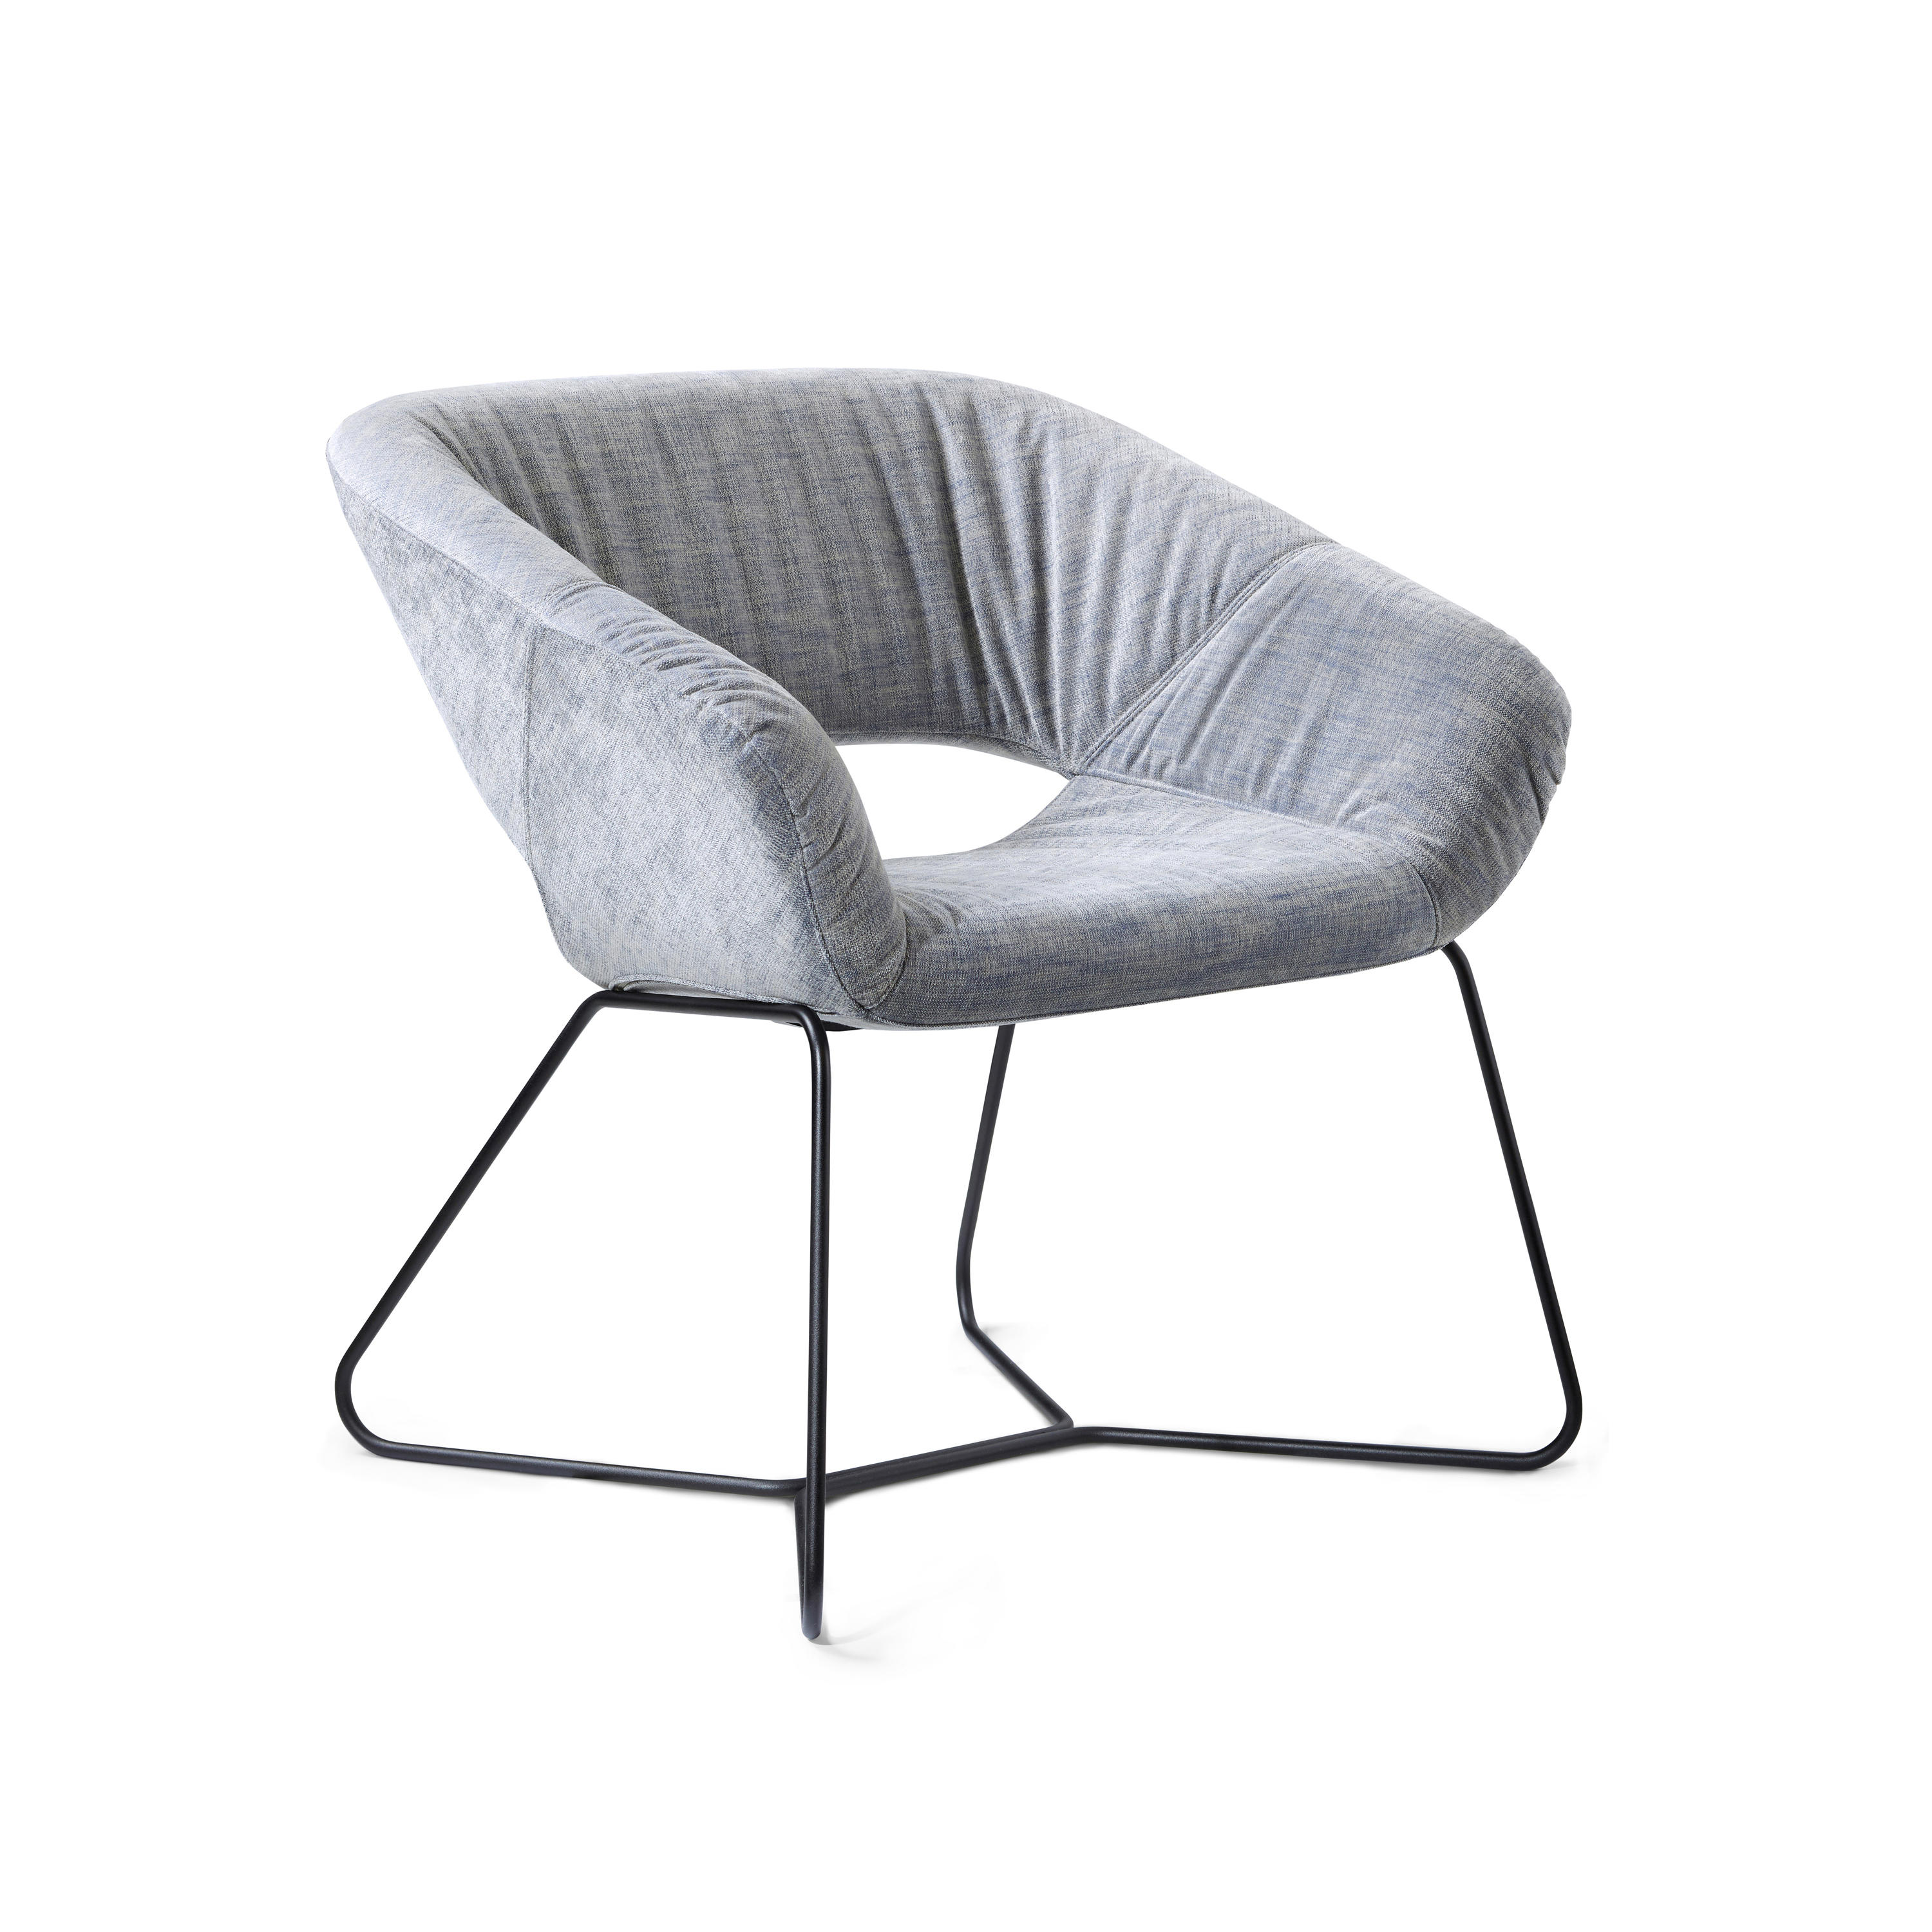 Averio Lounge Chair by Rüdiger Schaack for Züco